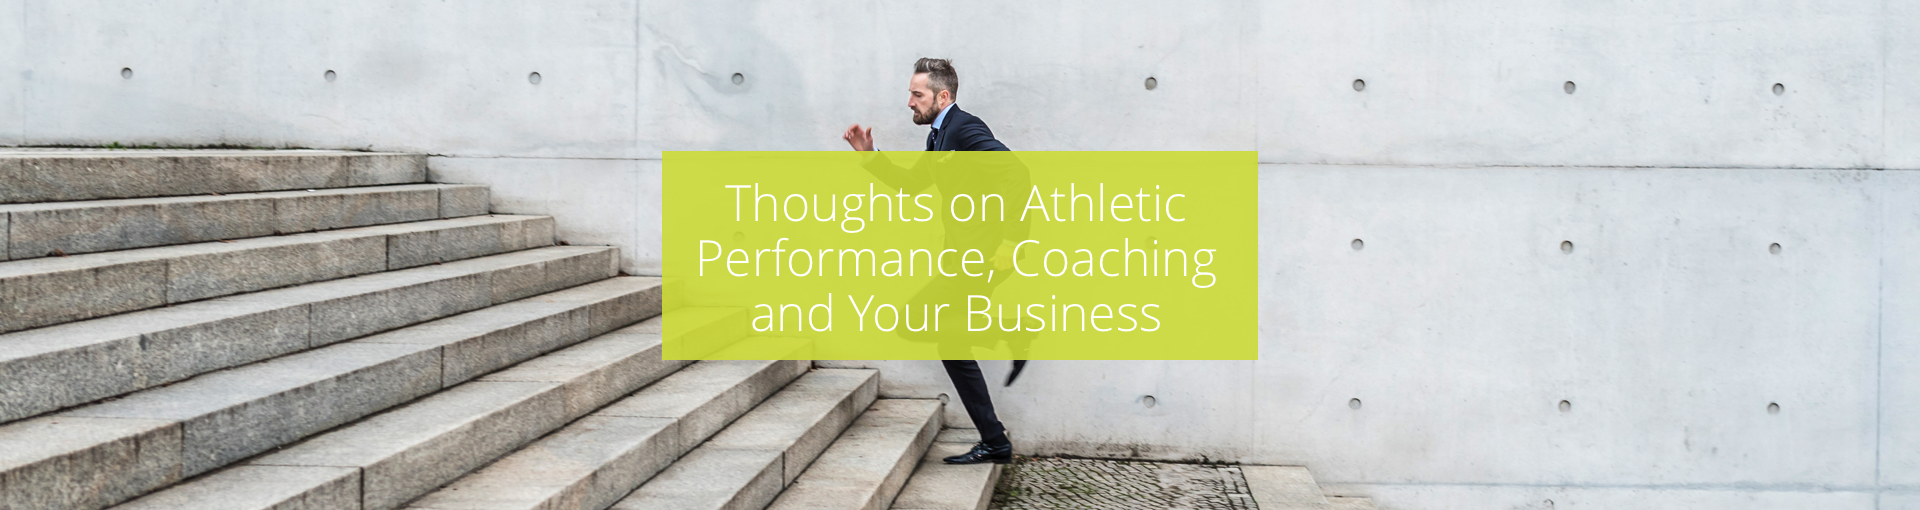 Thoughts on Athletic Performance, Coaching and Your Business Featured Image